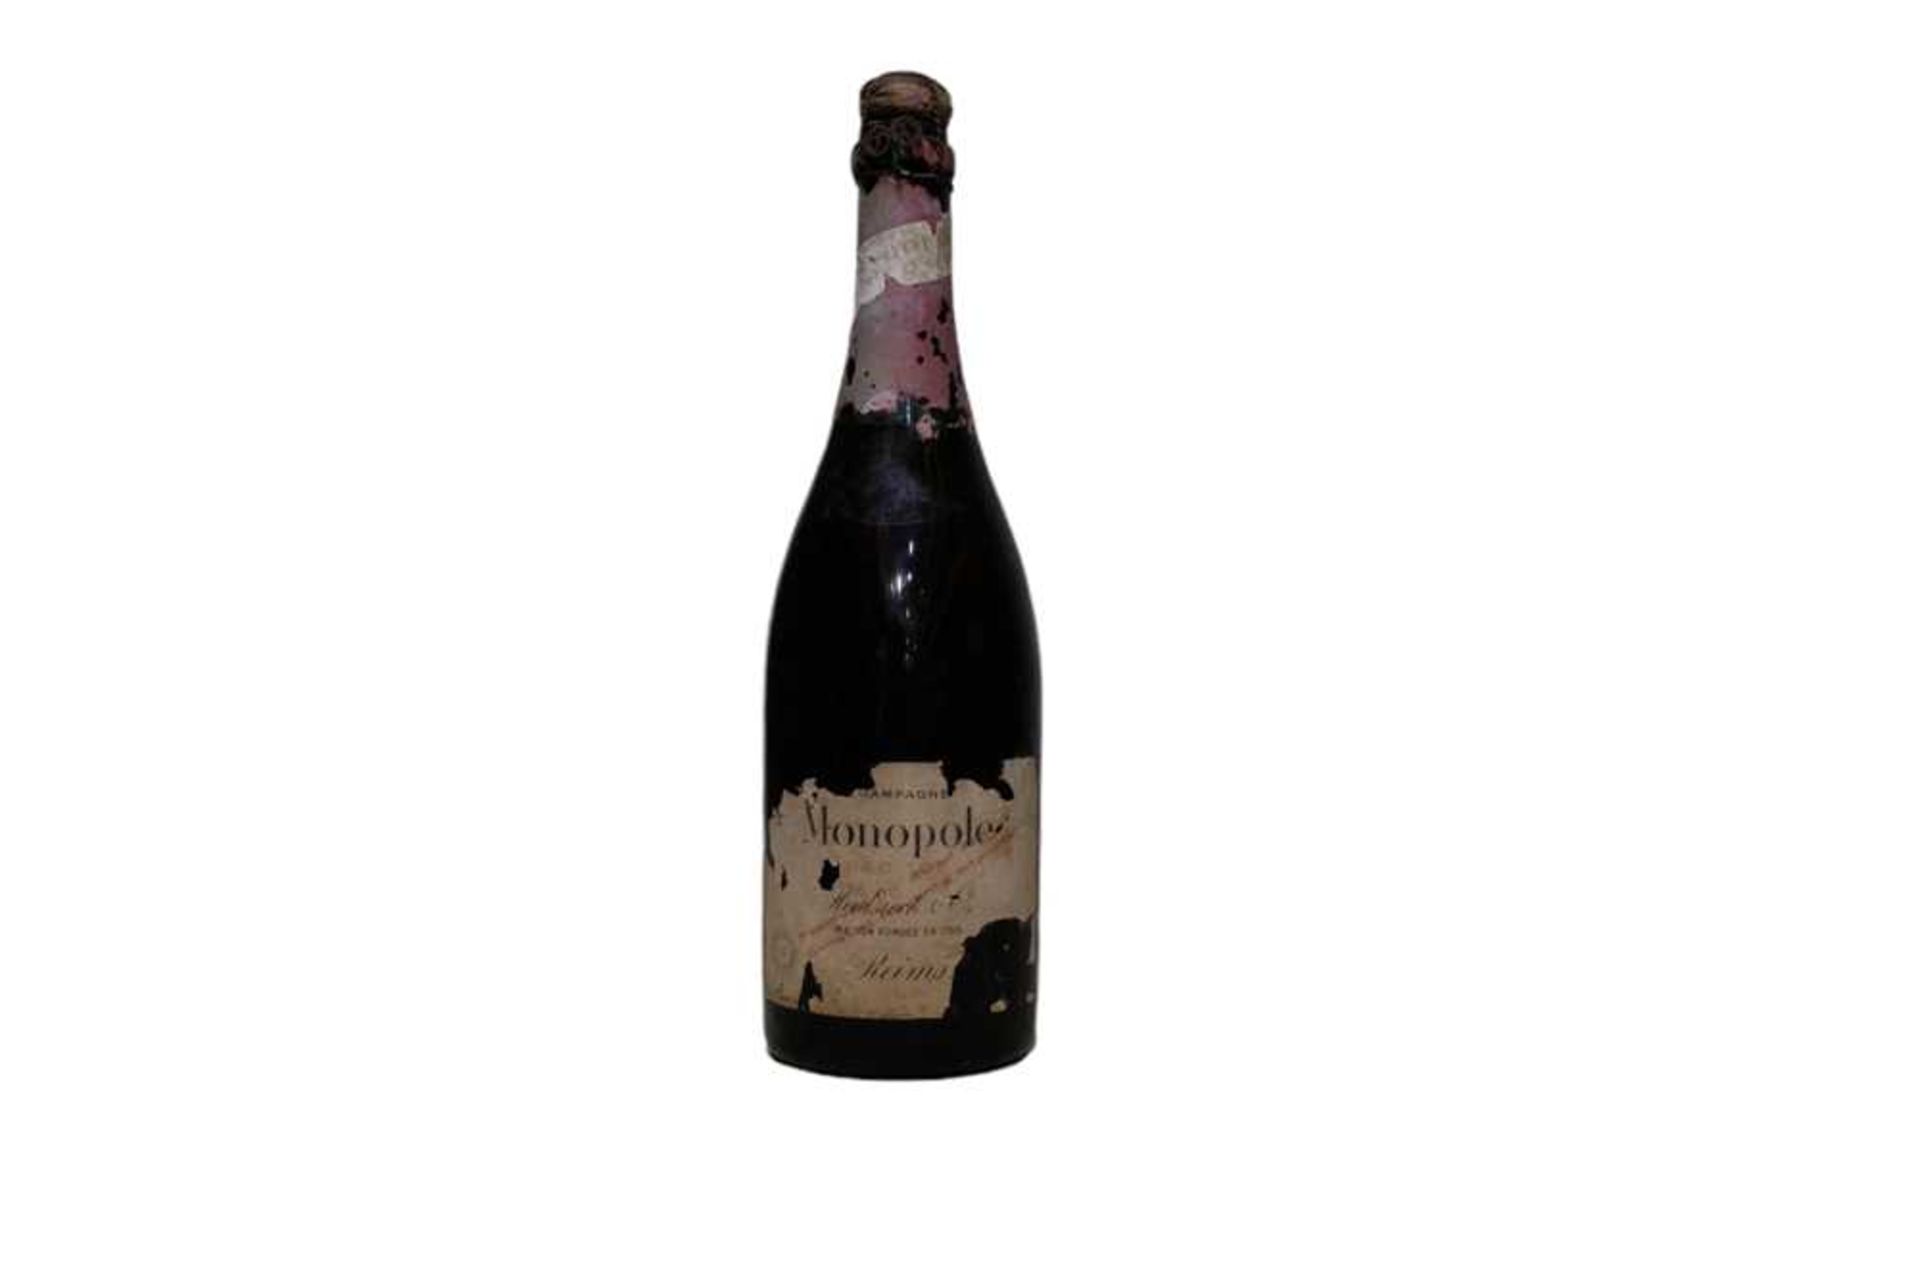 Heidsieck & Co., Red Top Monopole, Reims, Reserved for Allied Armies, NV, one bottle